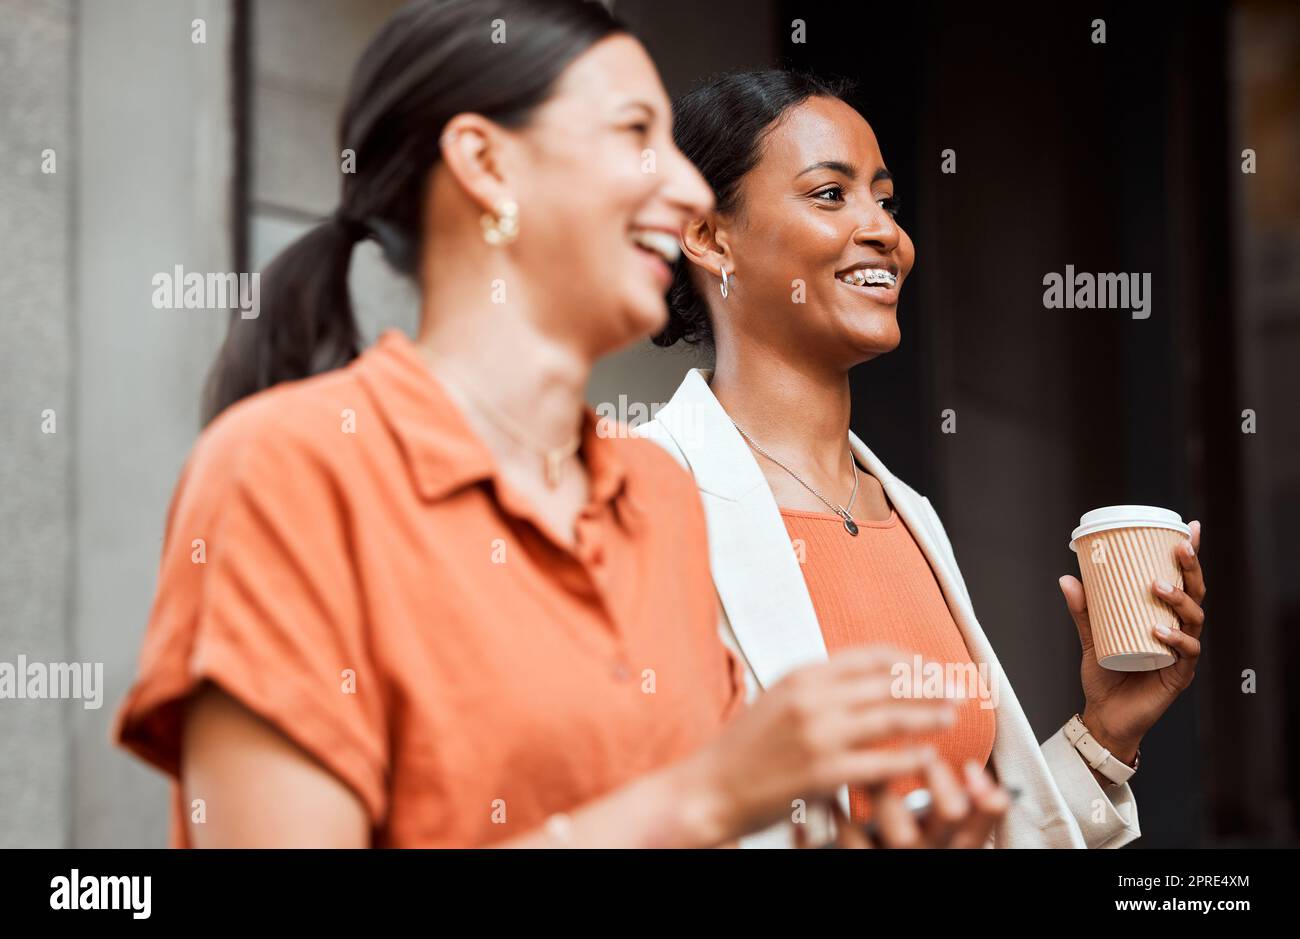 Teamwork, laughing and walking business colleagues on coffee or lunch break in city, town or downtown. Smiling, happy and motivated creative women bonding and commuting to work during morning routine Stock Photo